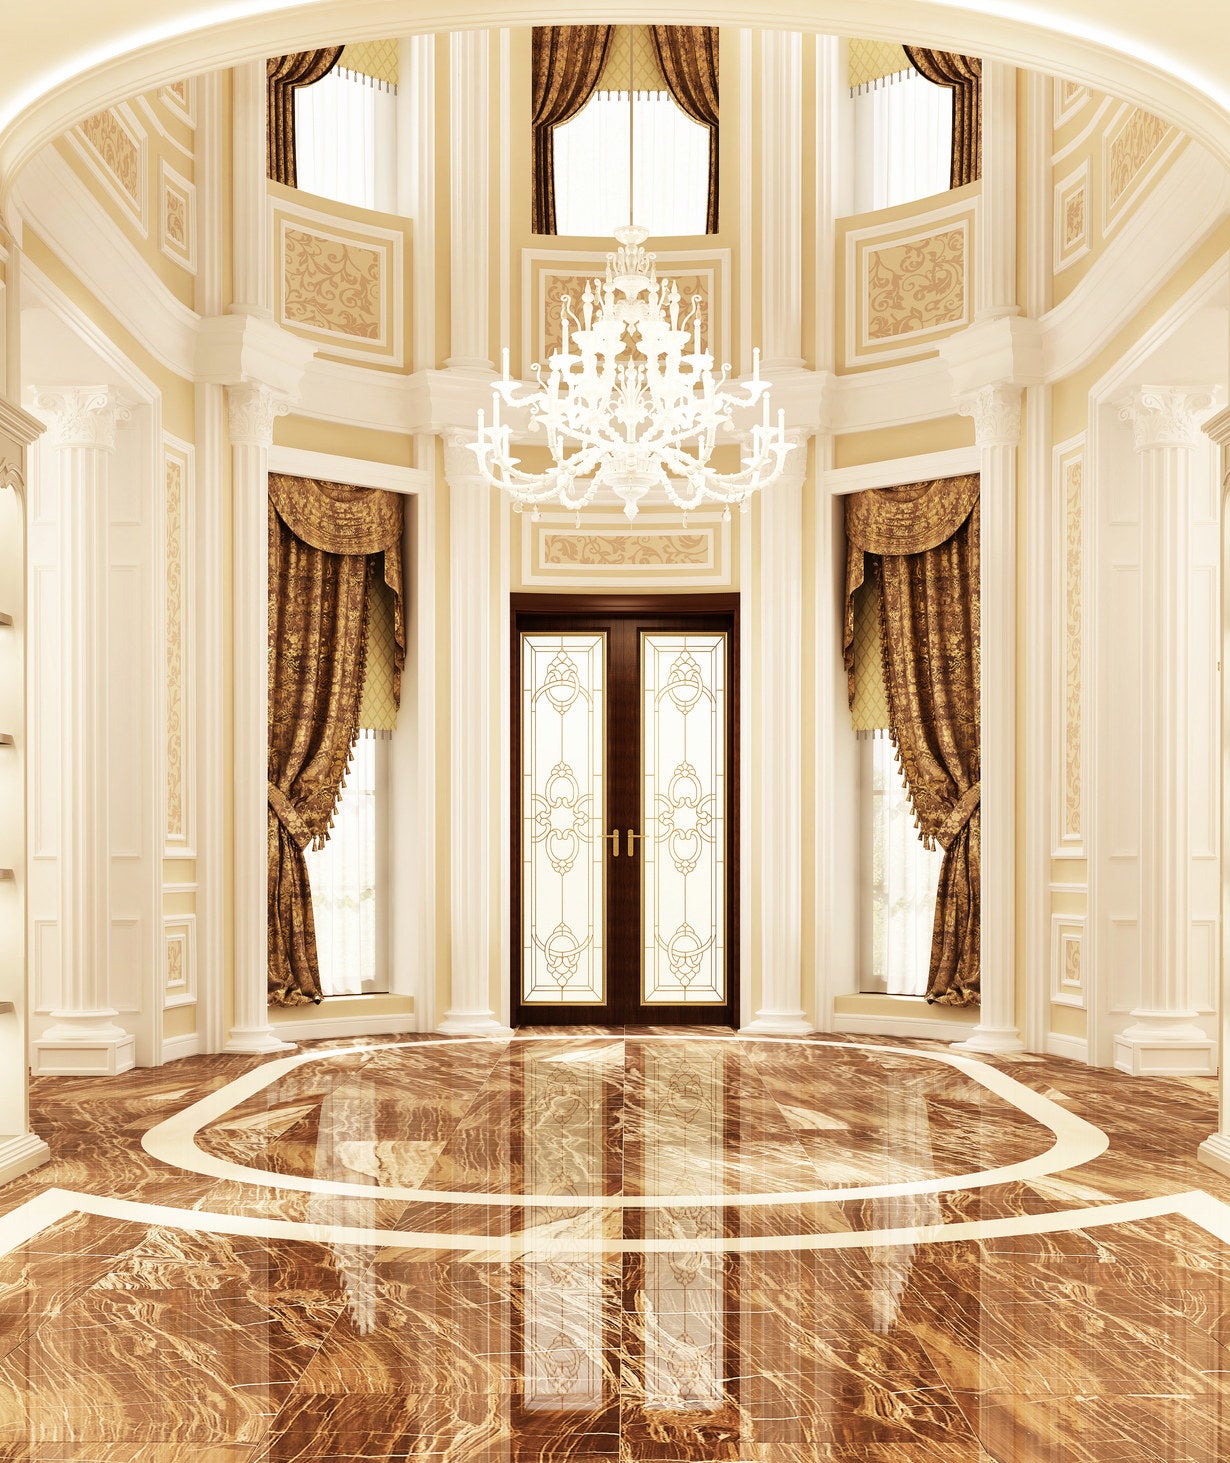 Entryway of a grand house with a chandelier and polished floors